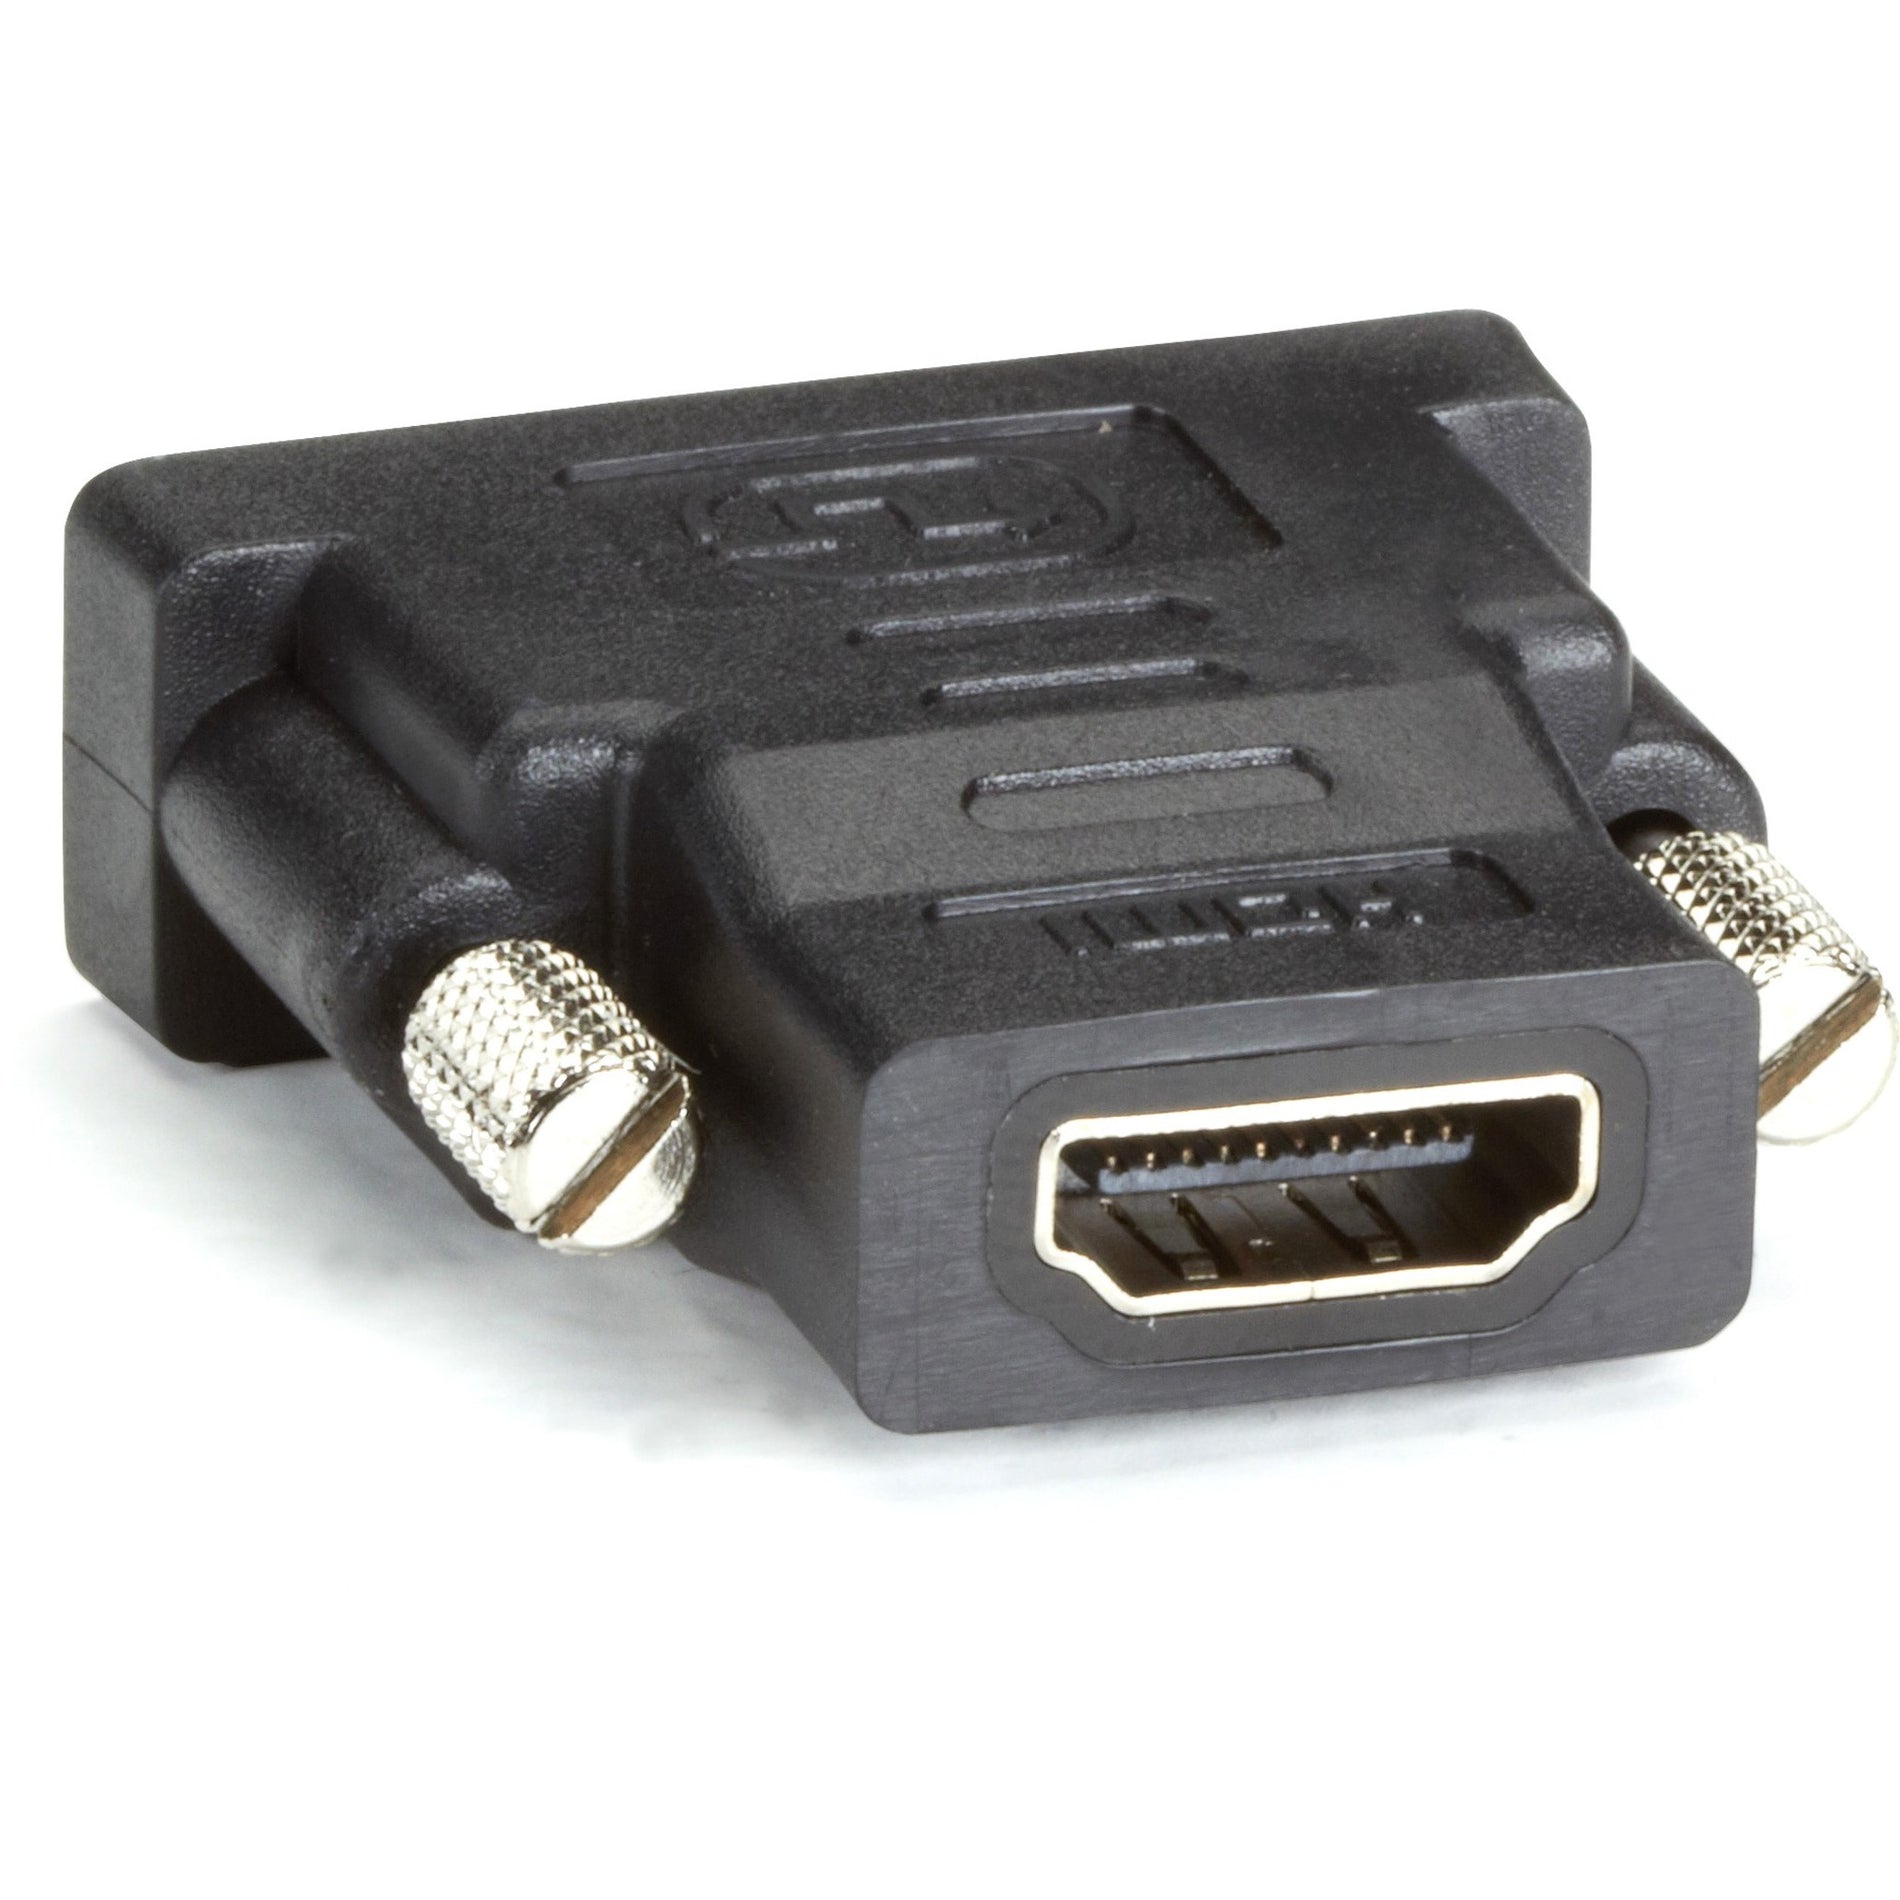 Black Box FA795-R2 HDMI to DVI-D Adapter, Molded, Nickel Plated, Lifetime Warranty